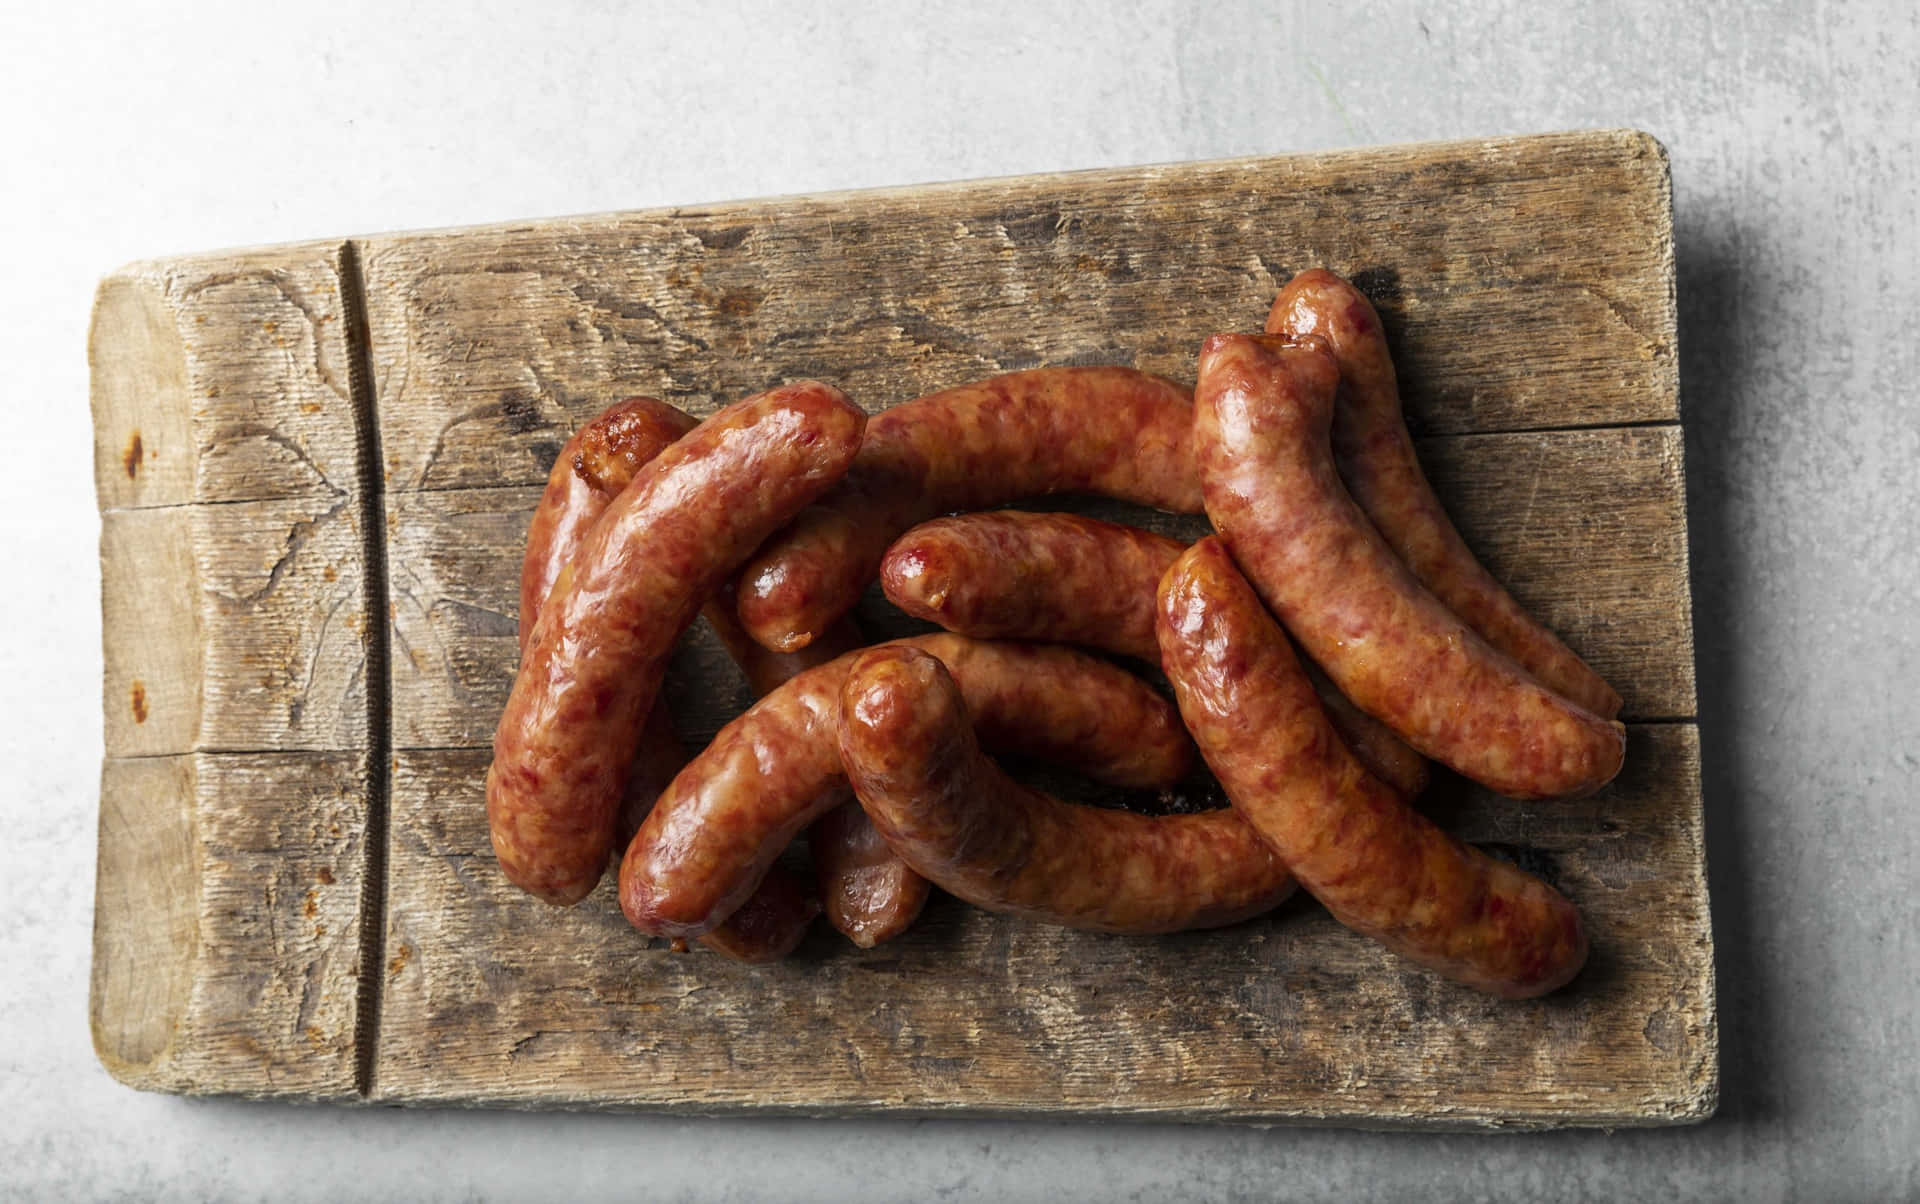 Deliciously grilled sausage – the perfect summer meal!